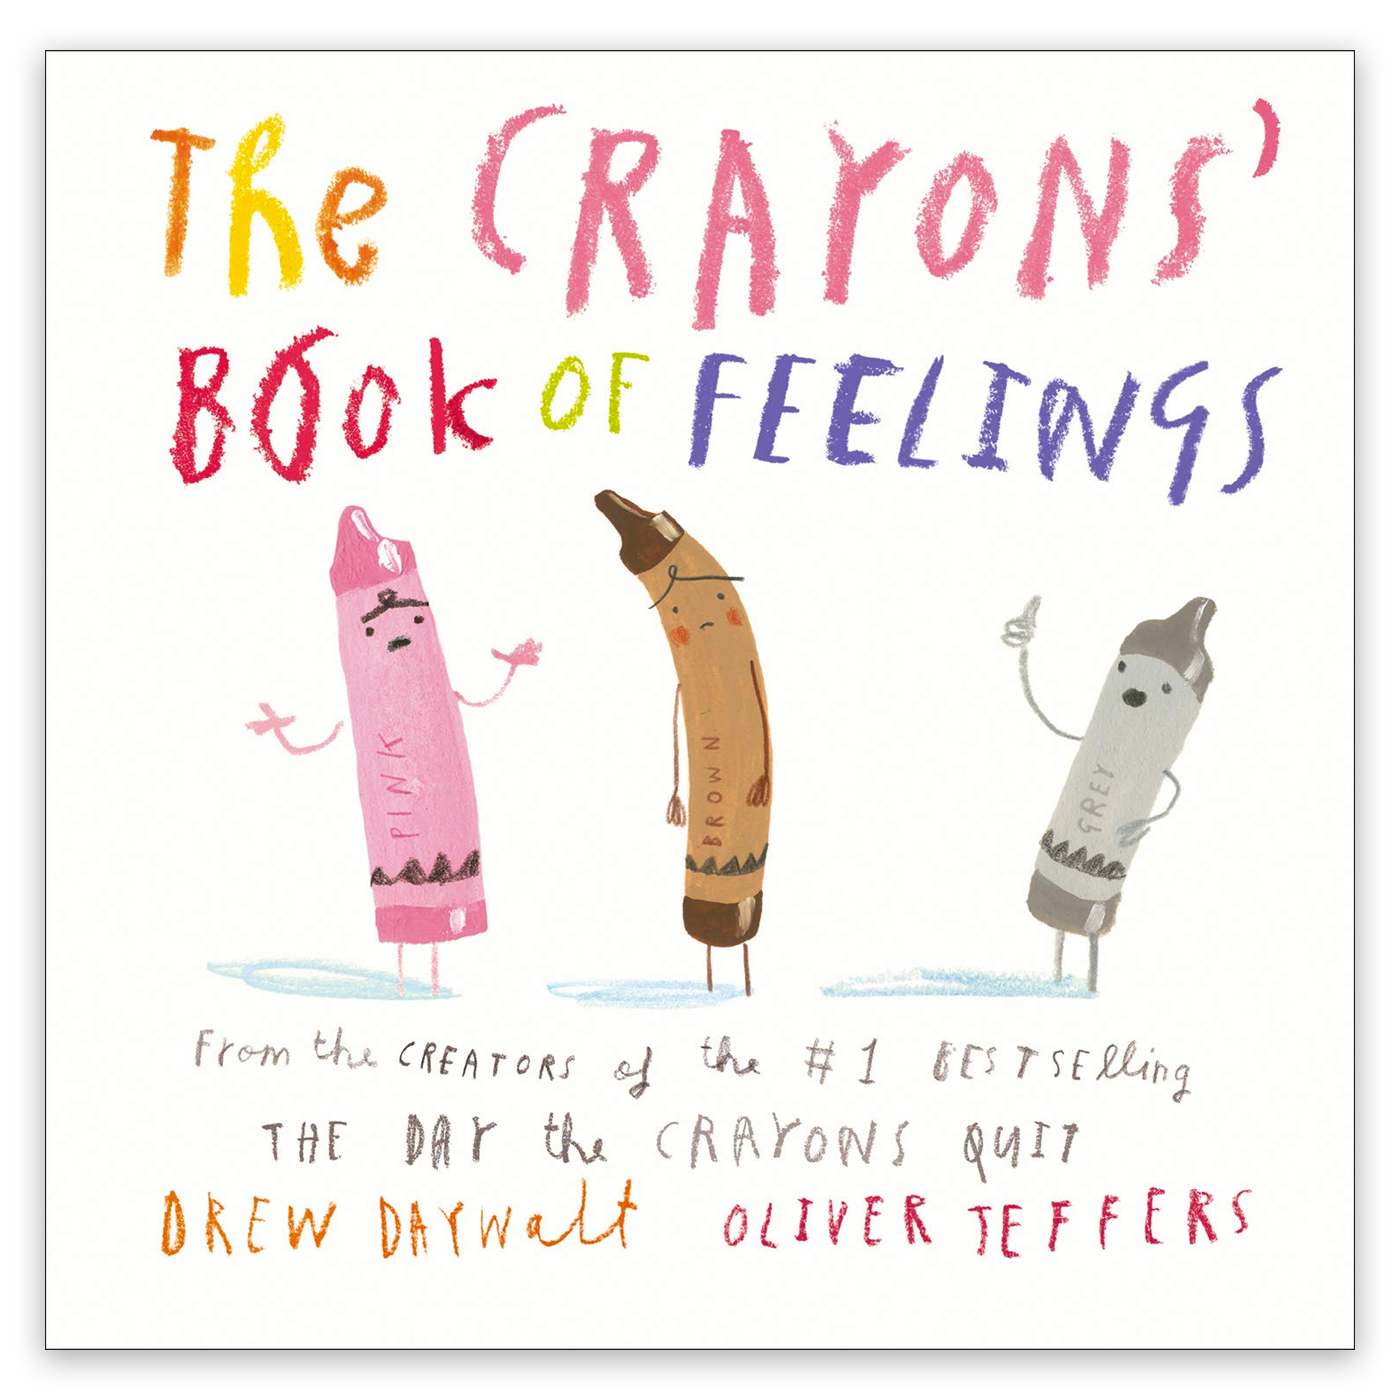 HARPER COLLINS The Crayons' Book of Feelings